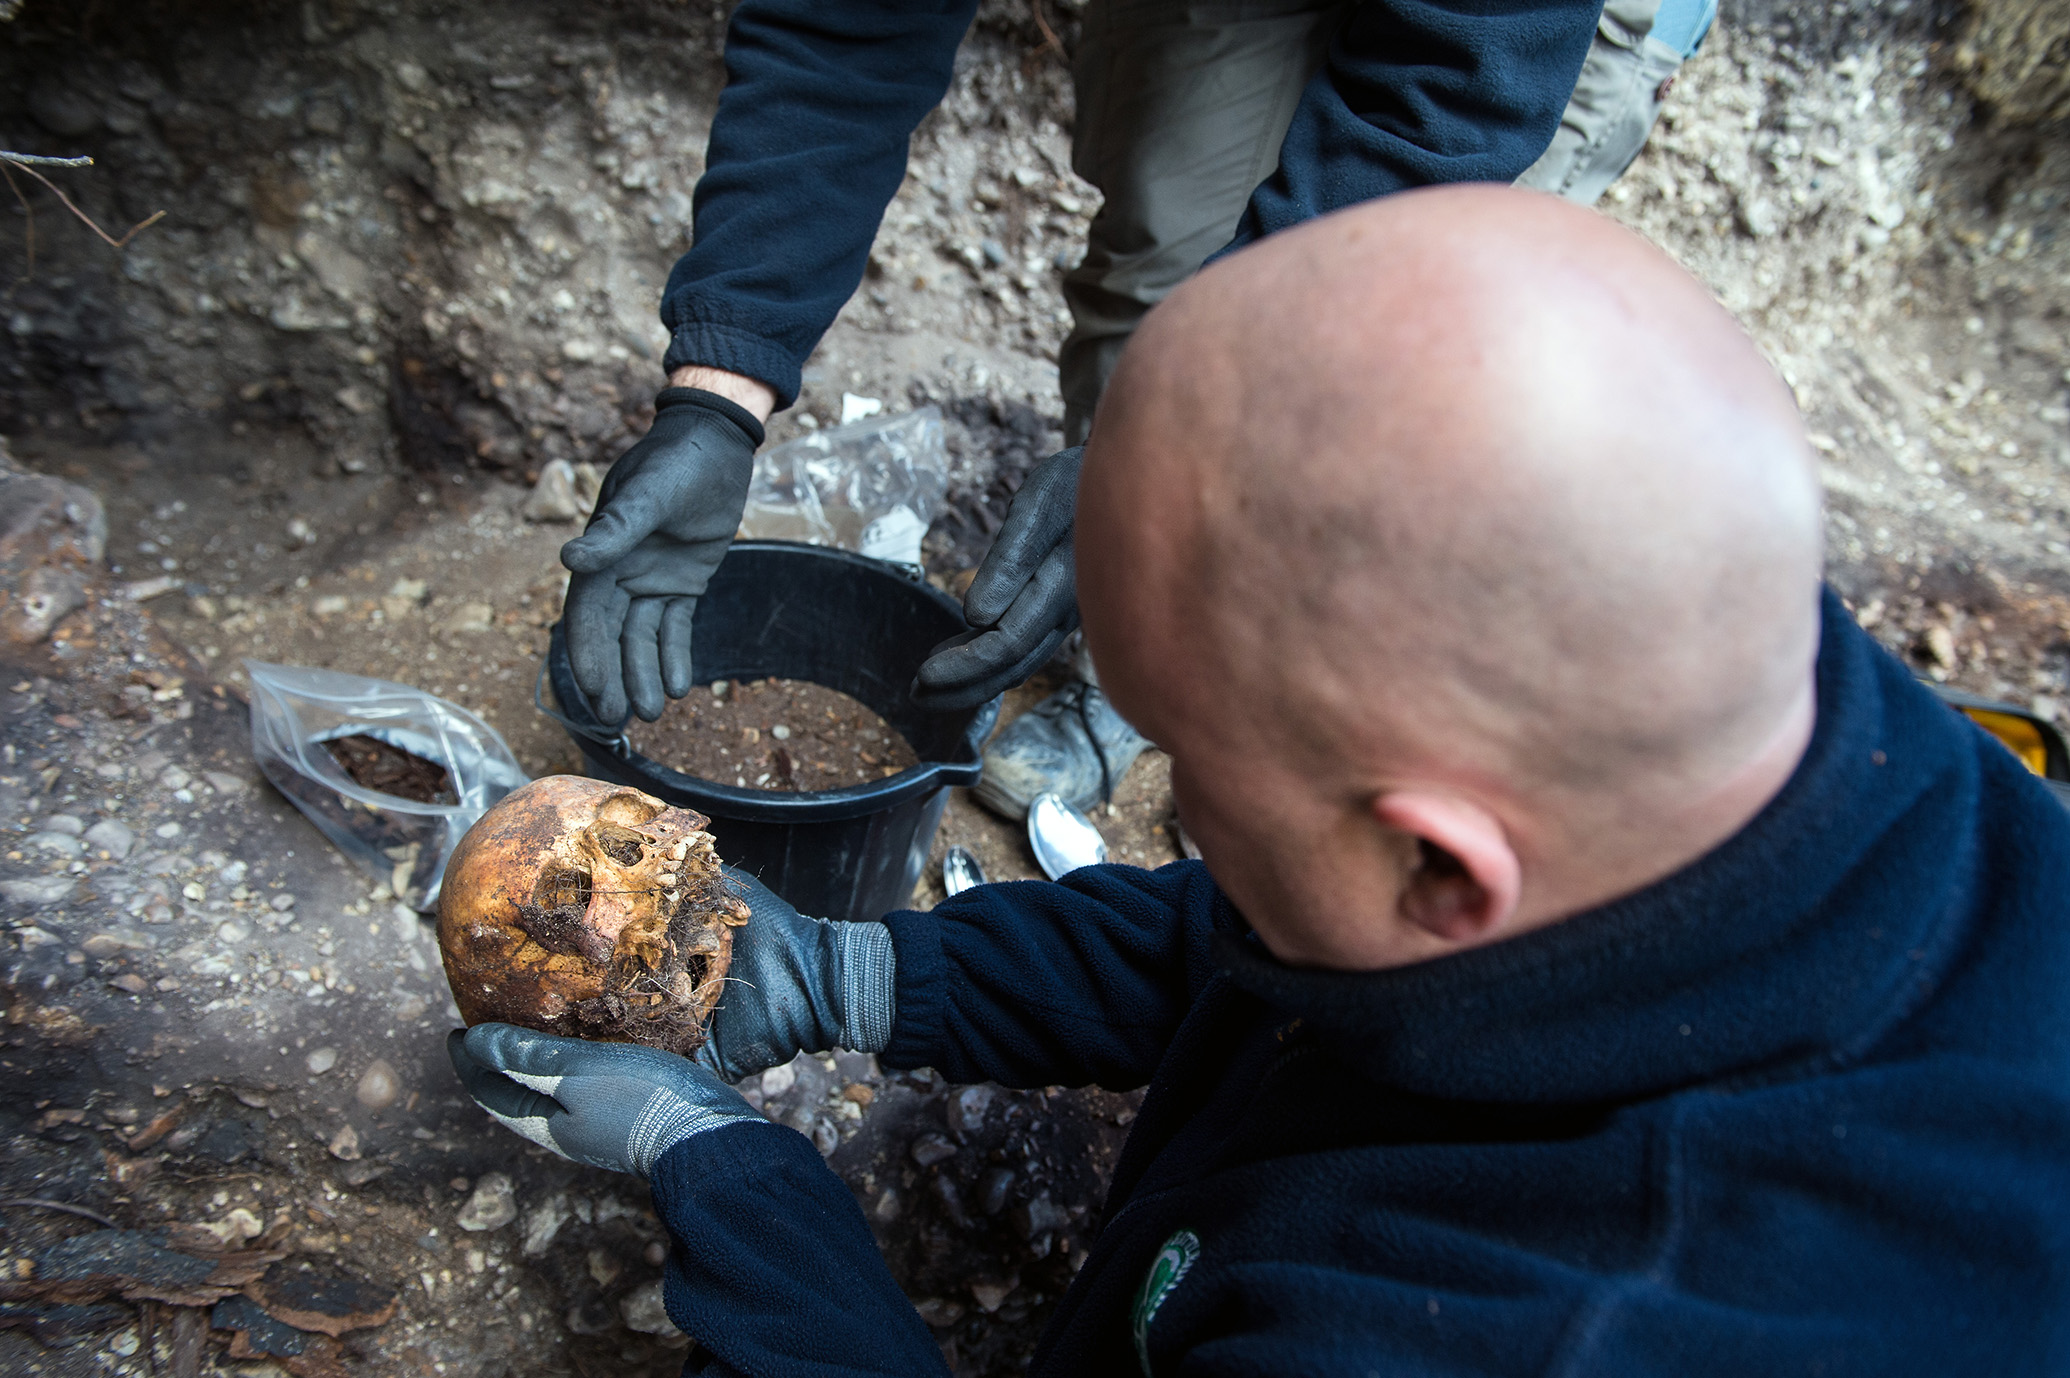 A skull being excavated by the Operation Nightingale team during Exercise Magwitch in Portsmouth's 'Rat Island'.